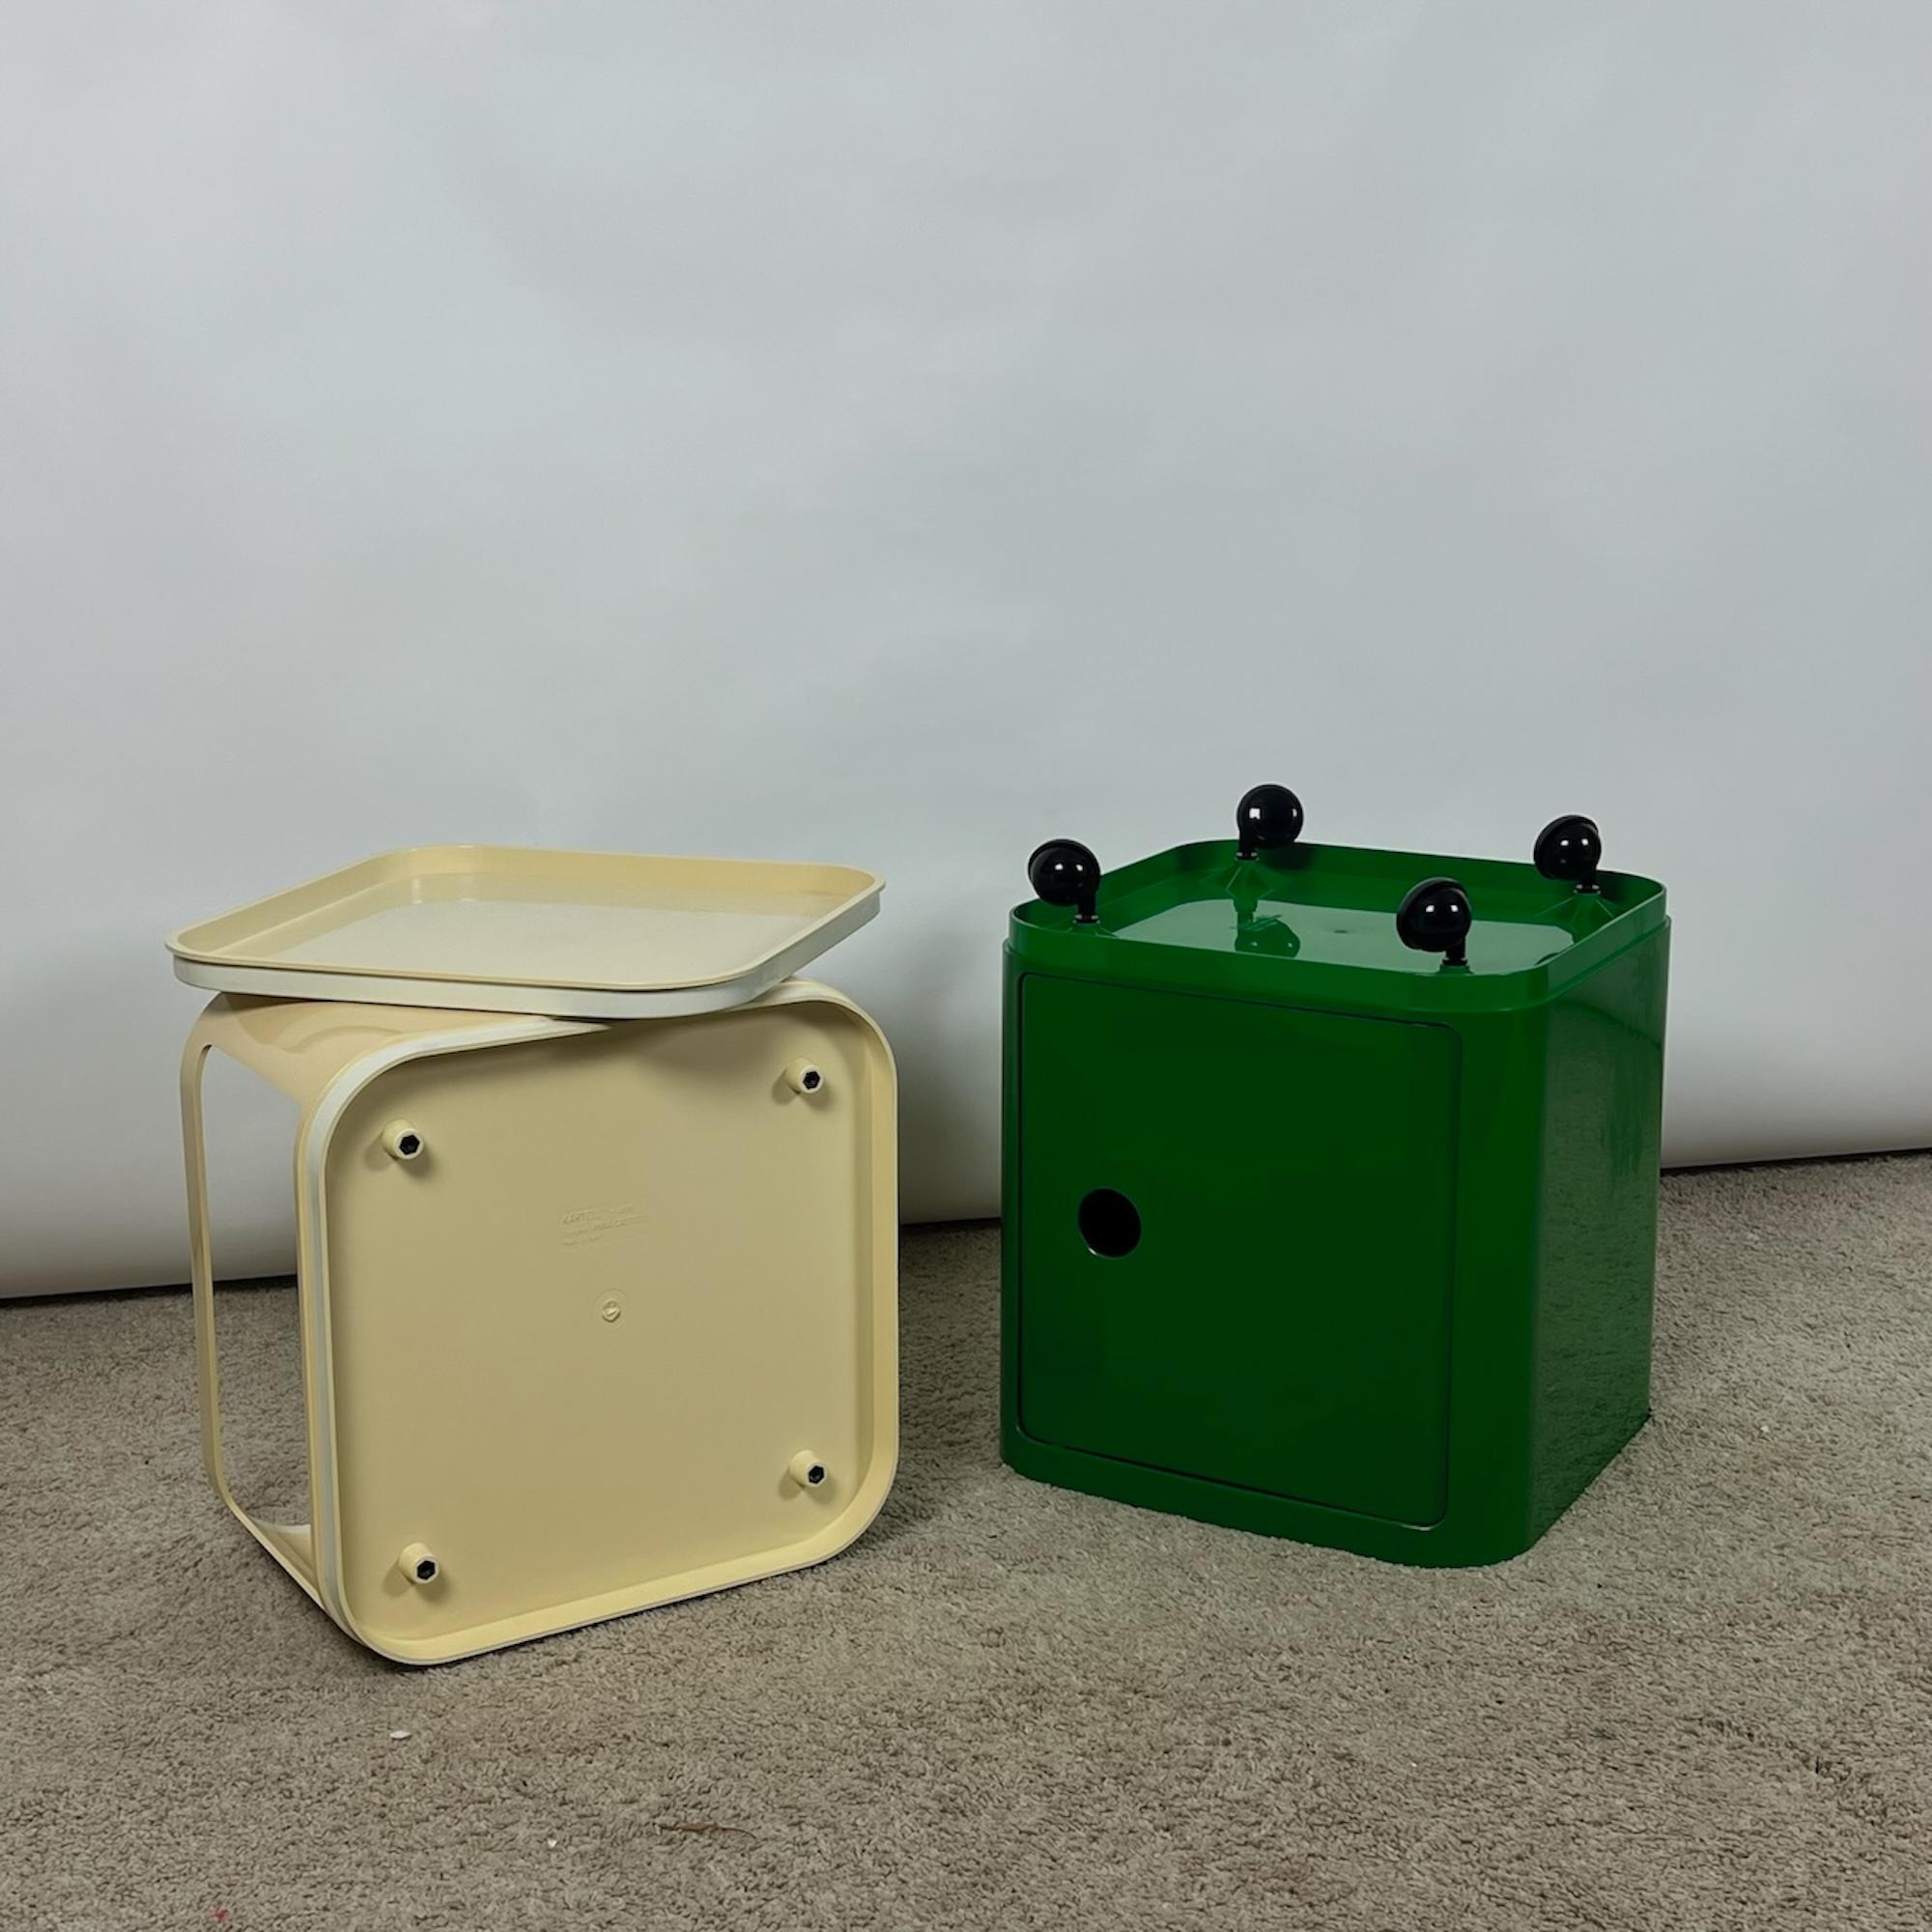 Plastic Kartell 'Componibili' Square Based Cabinet Modules in green and white, 1960s For Sale